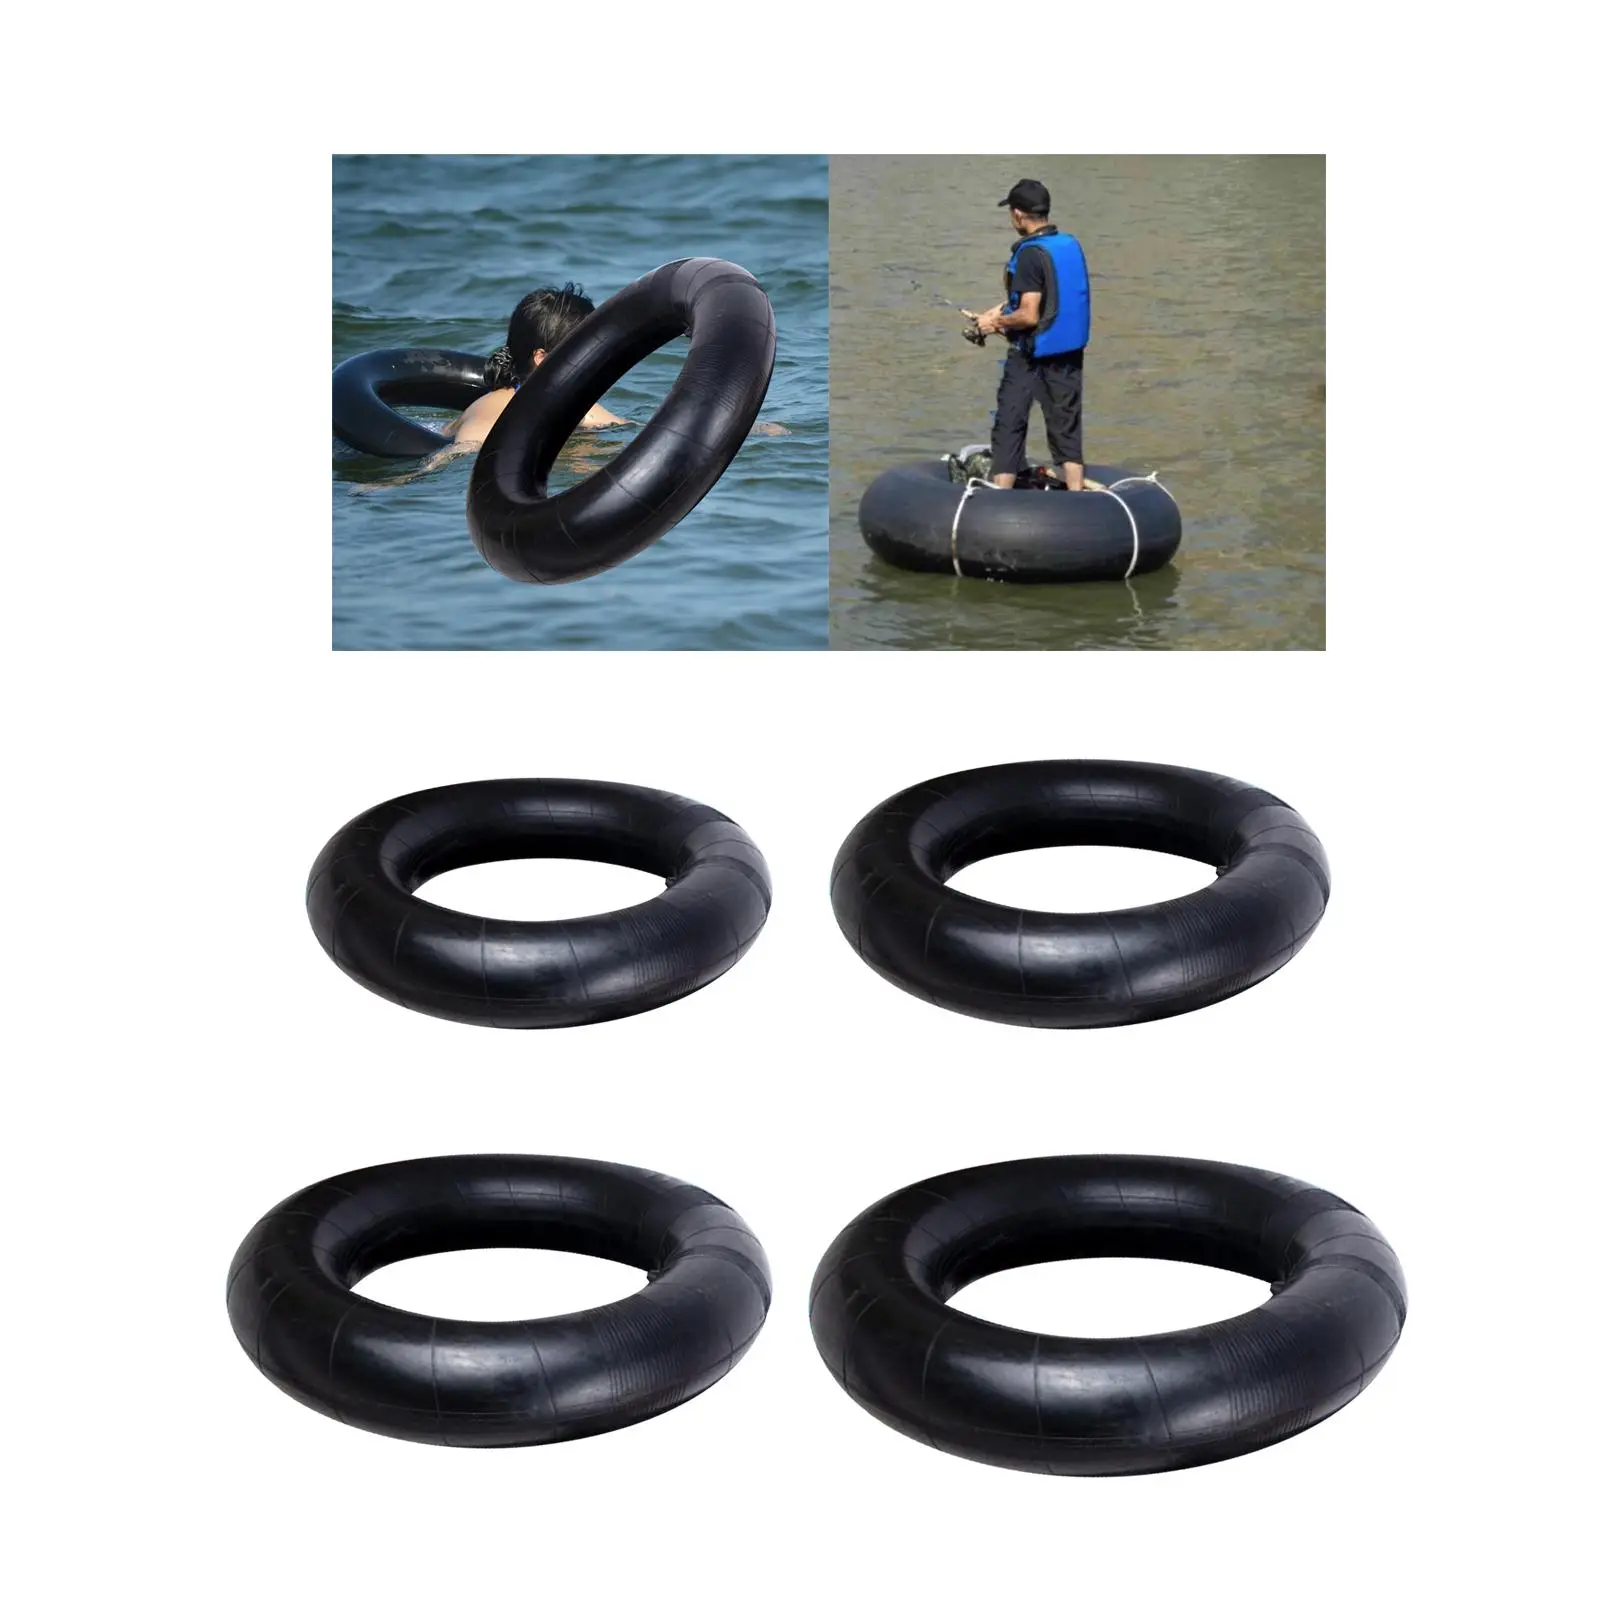 River Tube for Floating Snow Tube Swim Tubes Sturdy River Rafts for Adults